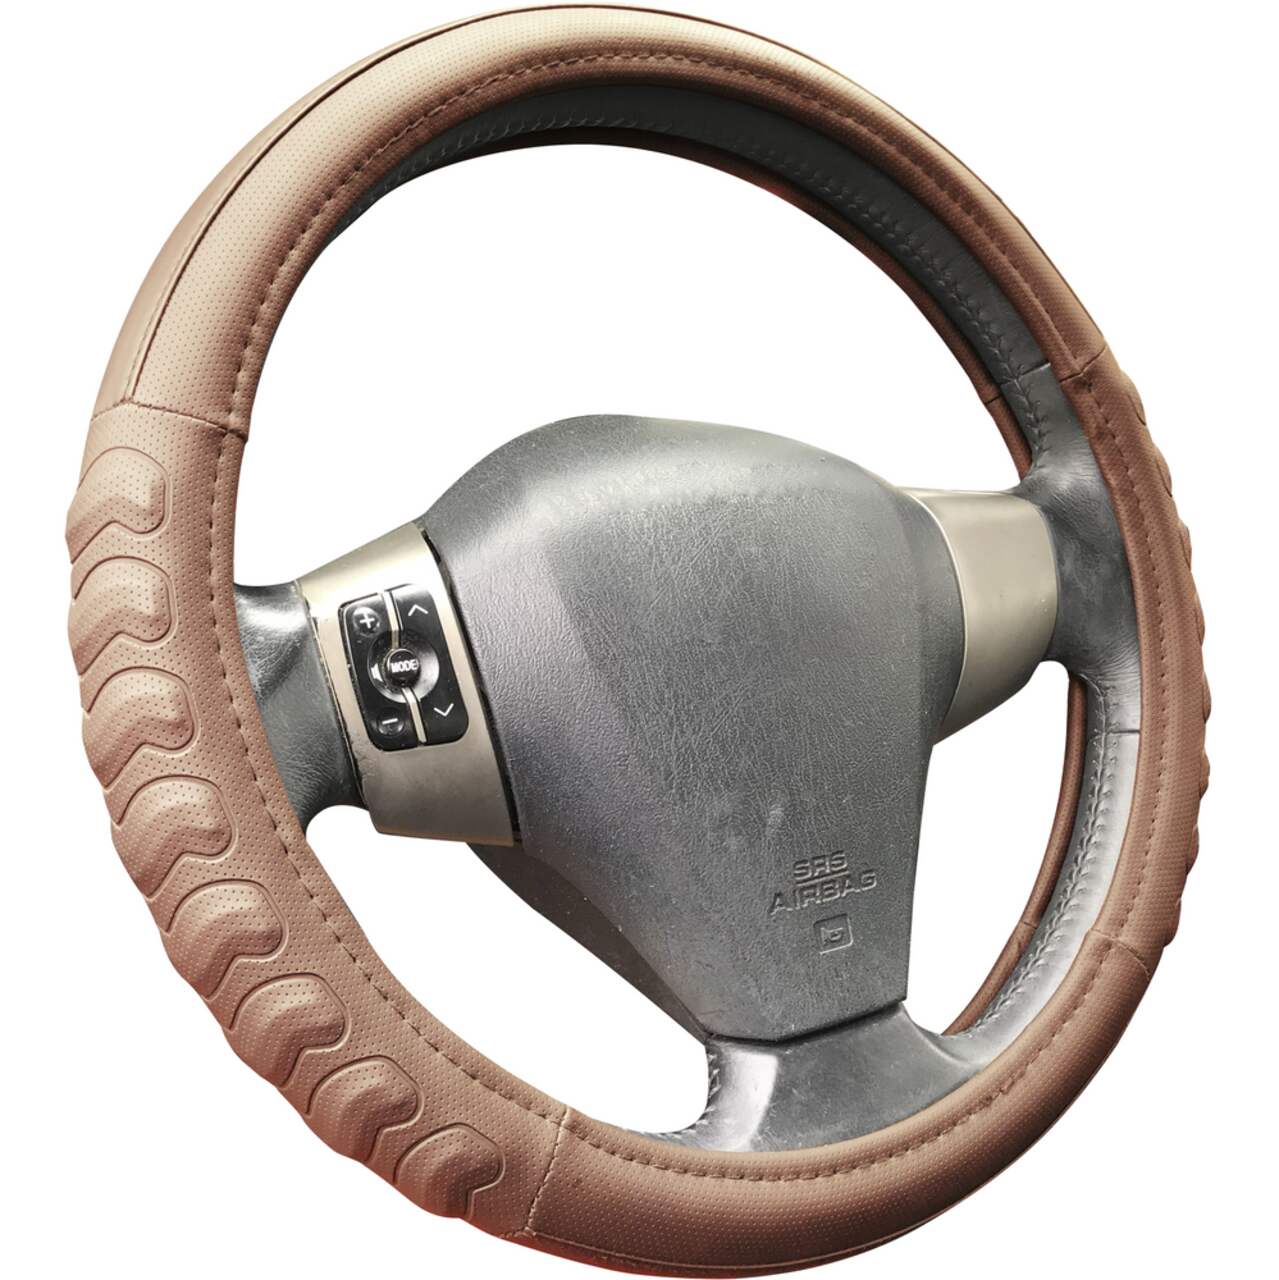 AutoTrends Chevron Comfort Grip Faux Leather Steering Wheel Cover, Tan